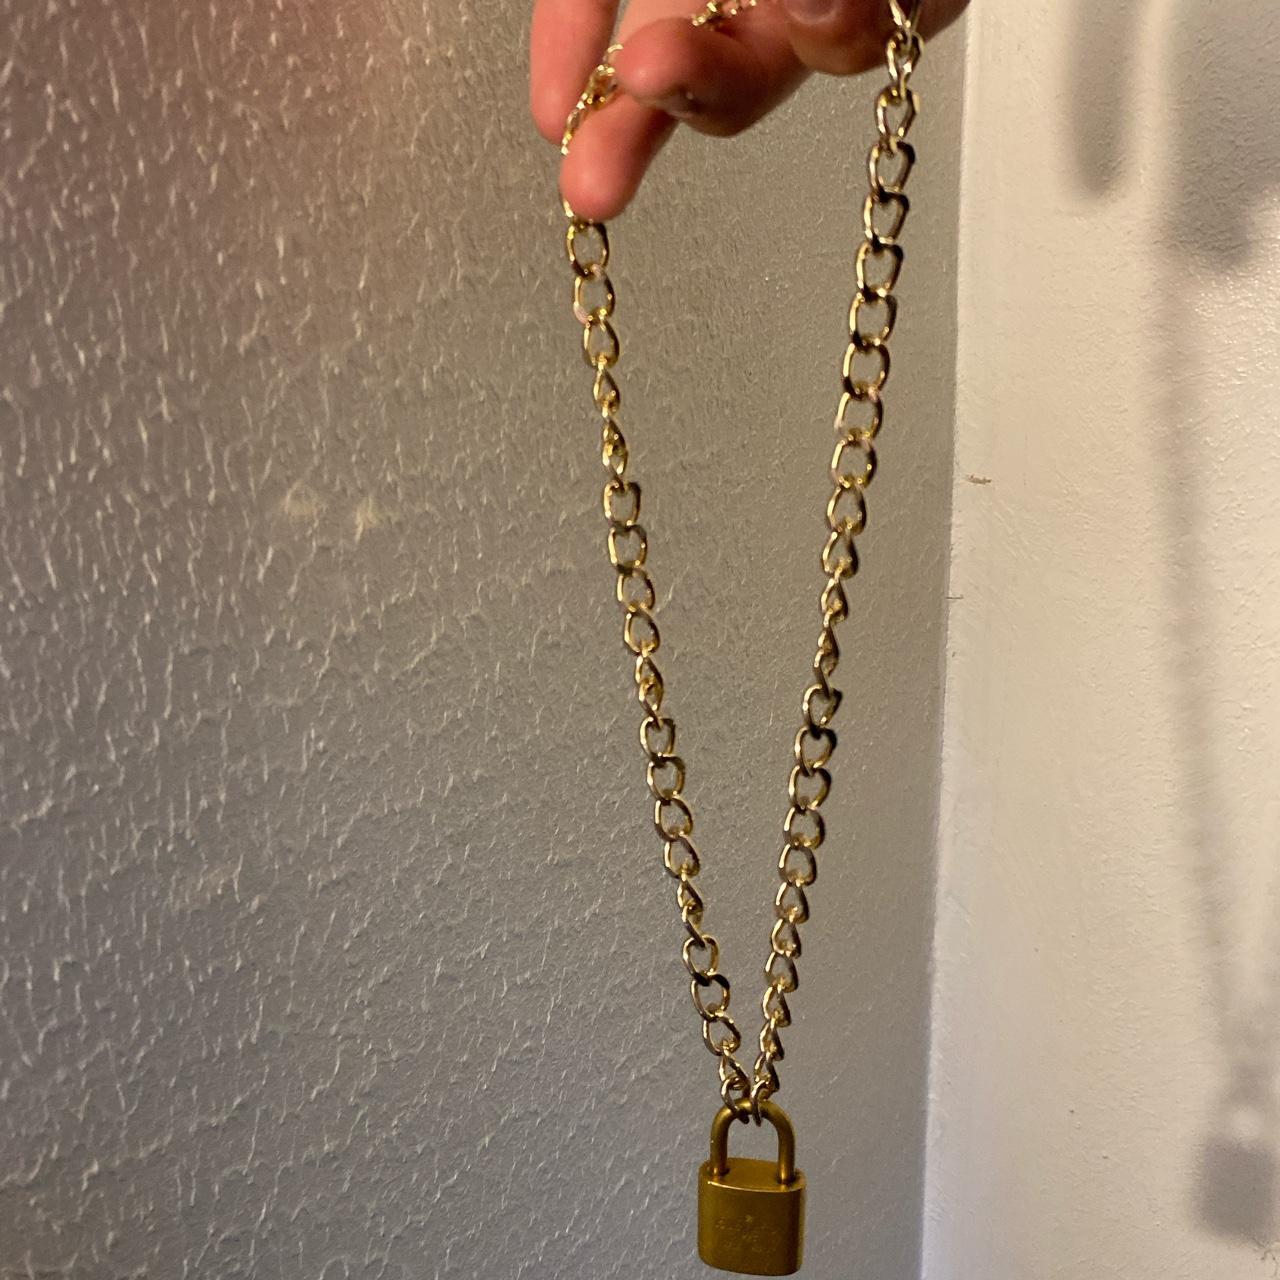 On HOLD - Authentic Louis Vuitton Lock necklace - Depop